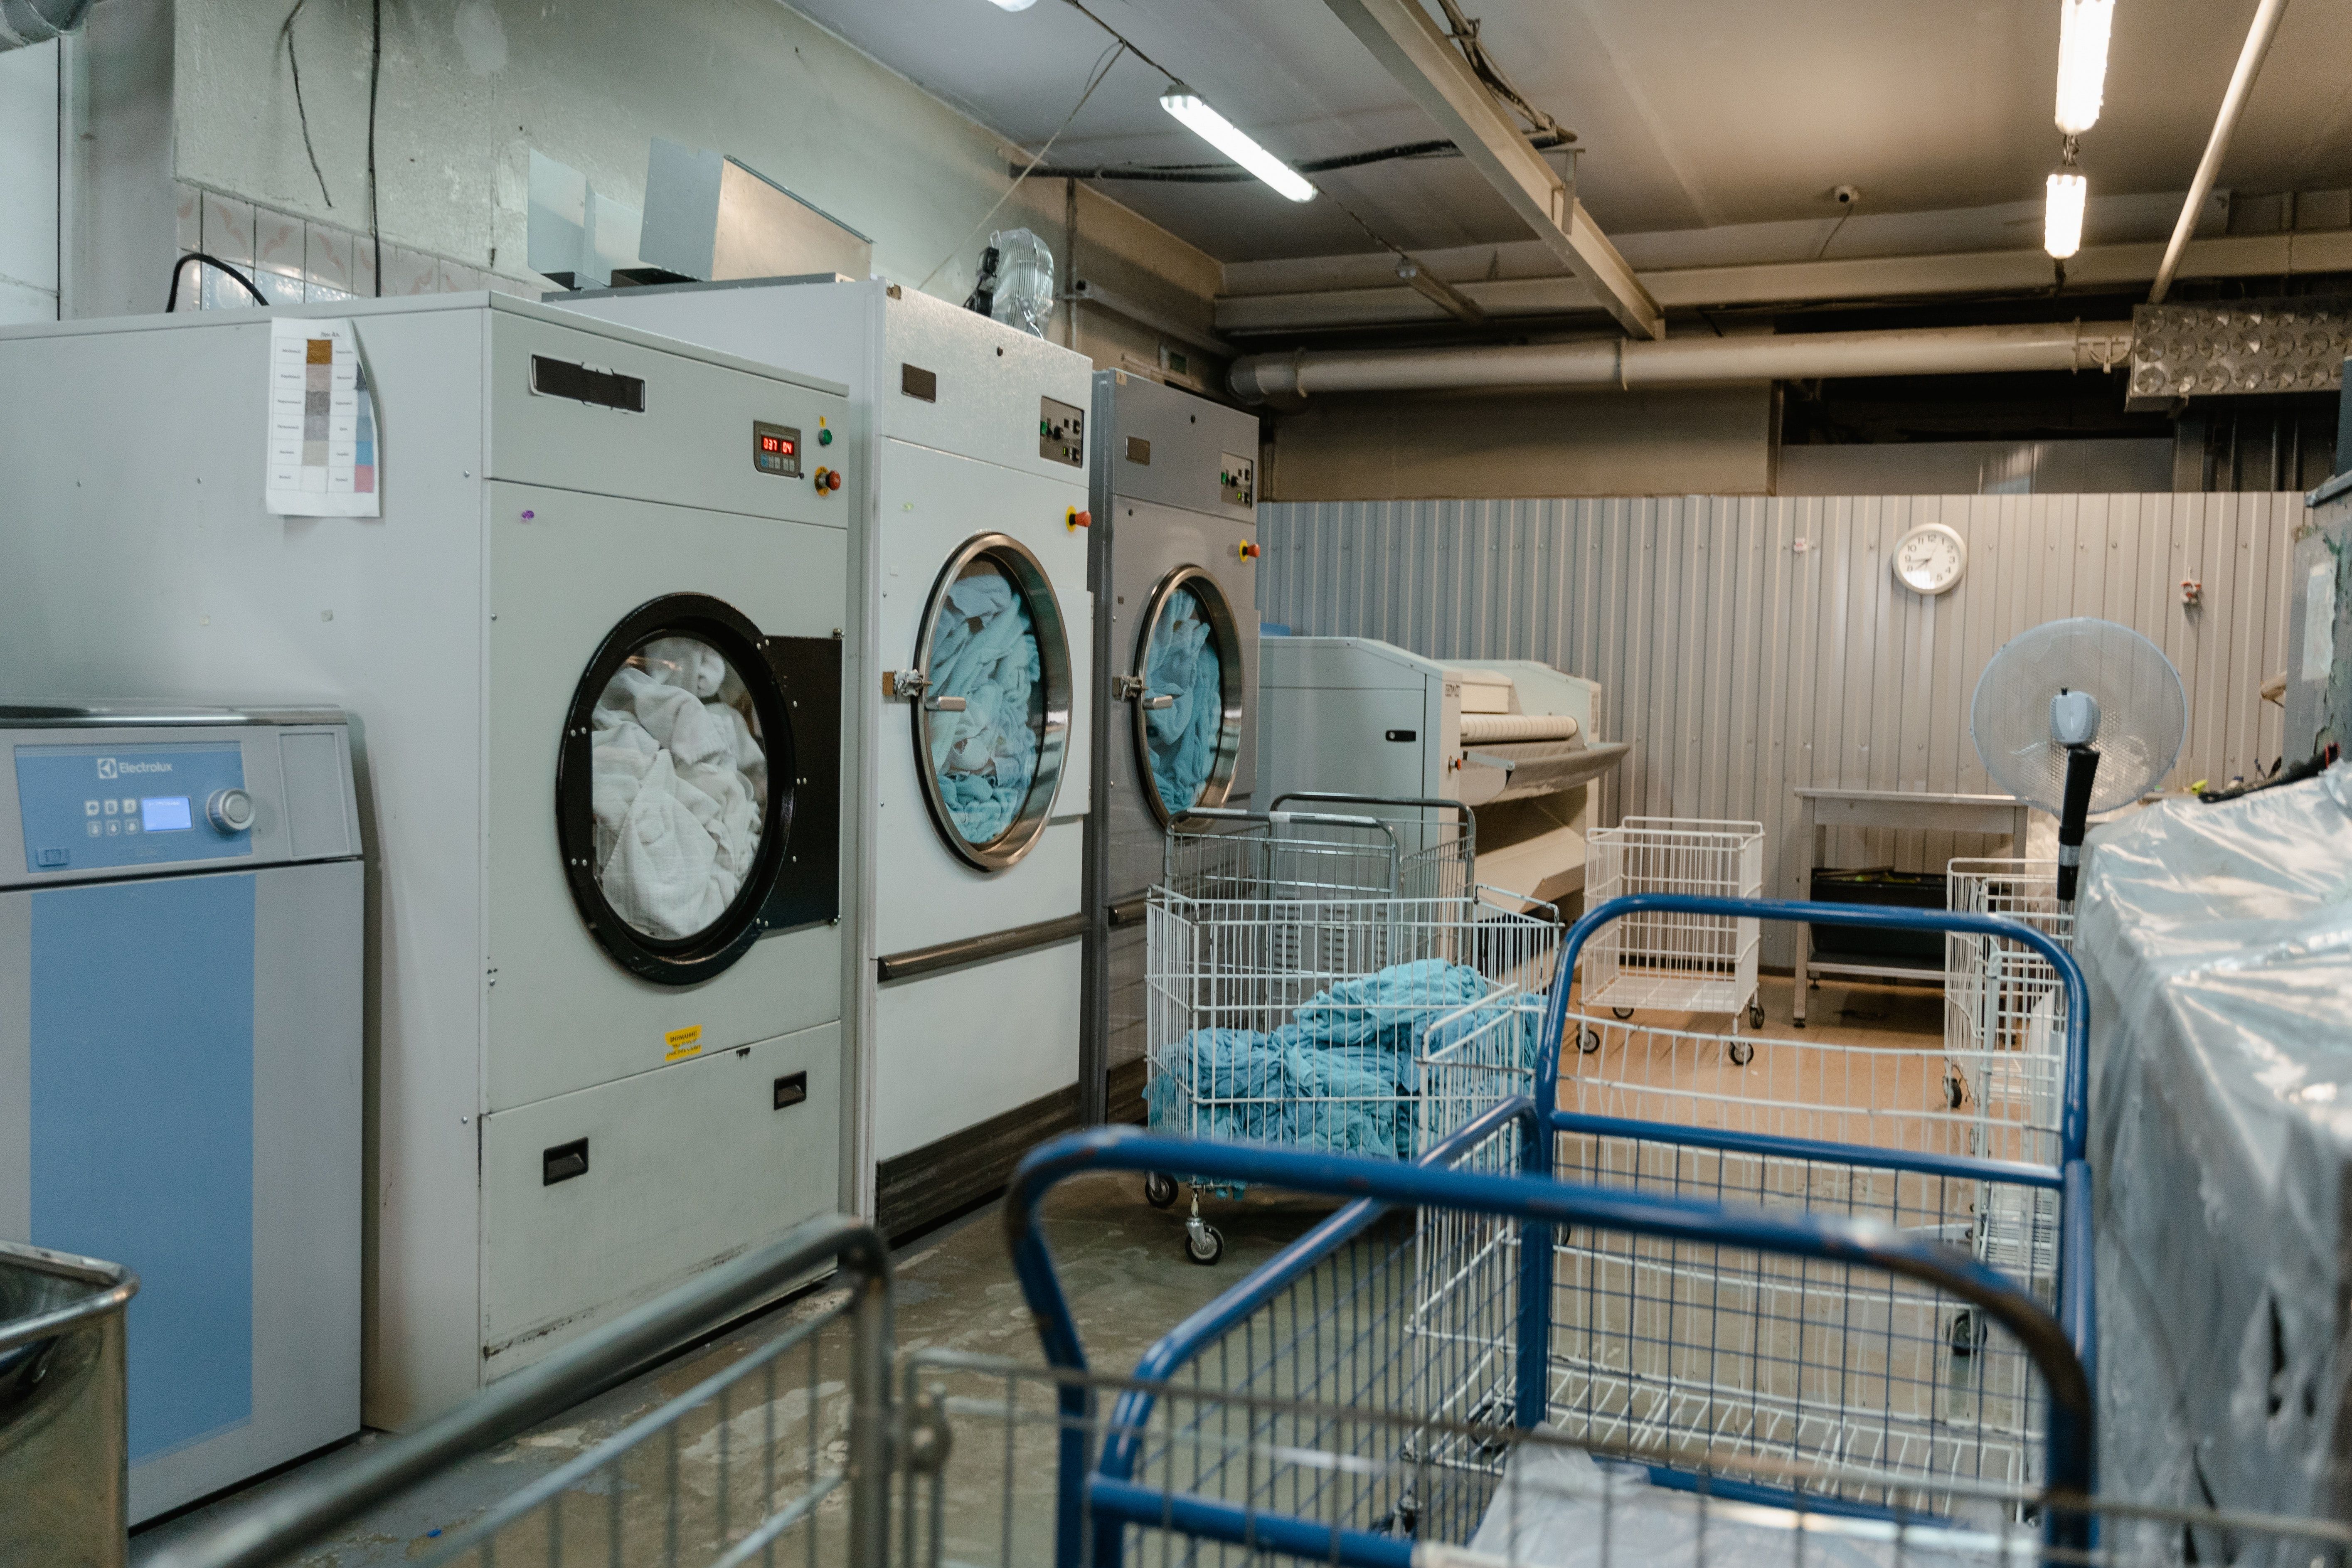 Photo of various washing machines in a room